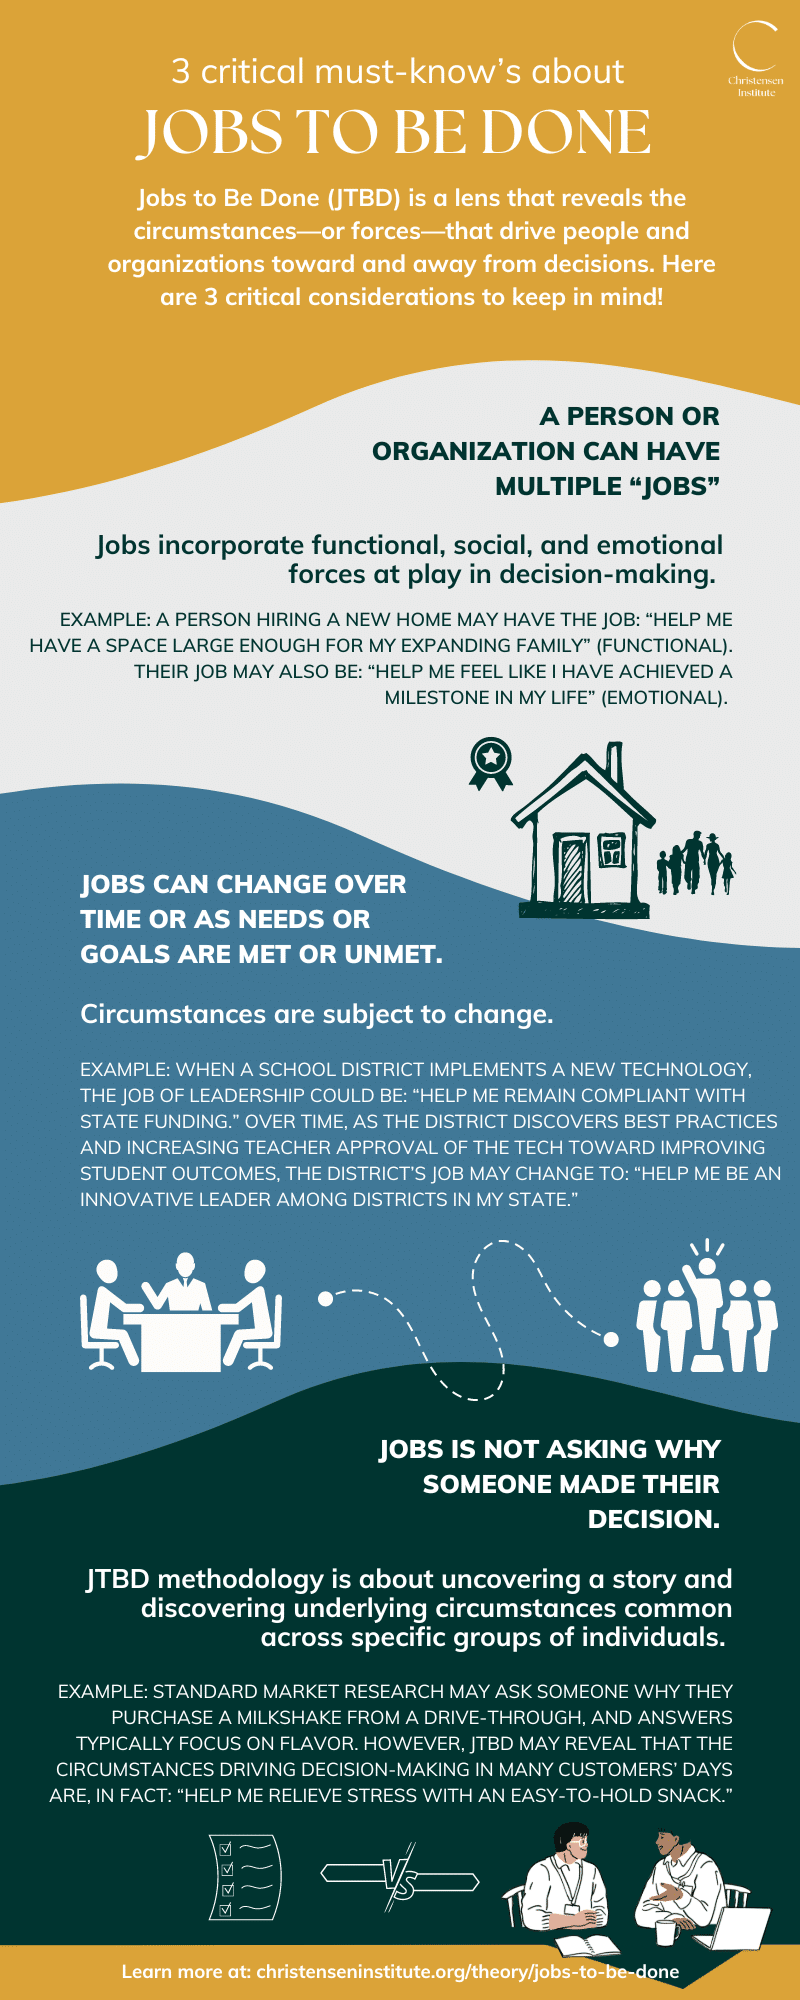 Infographic titled 3 critical must-knows about Jobs to Be Done